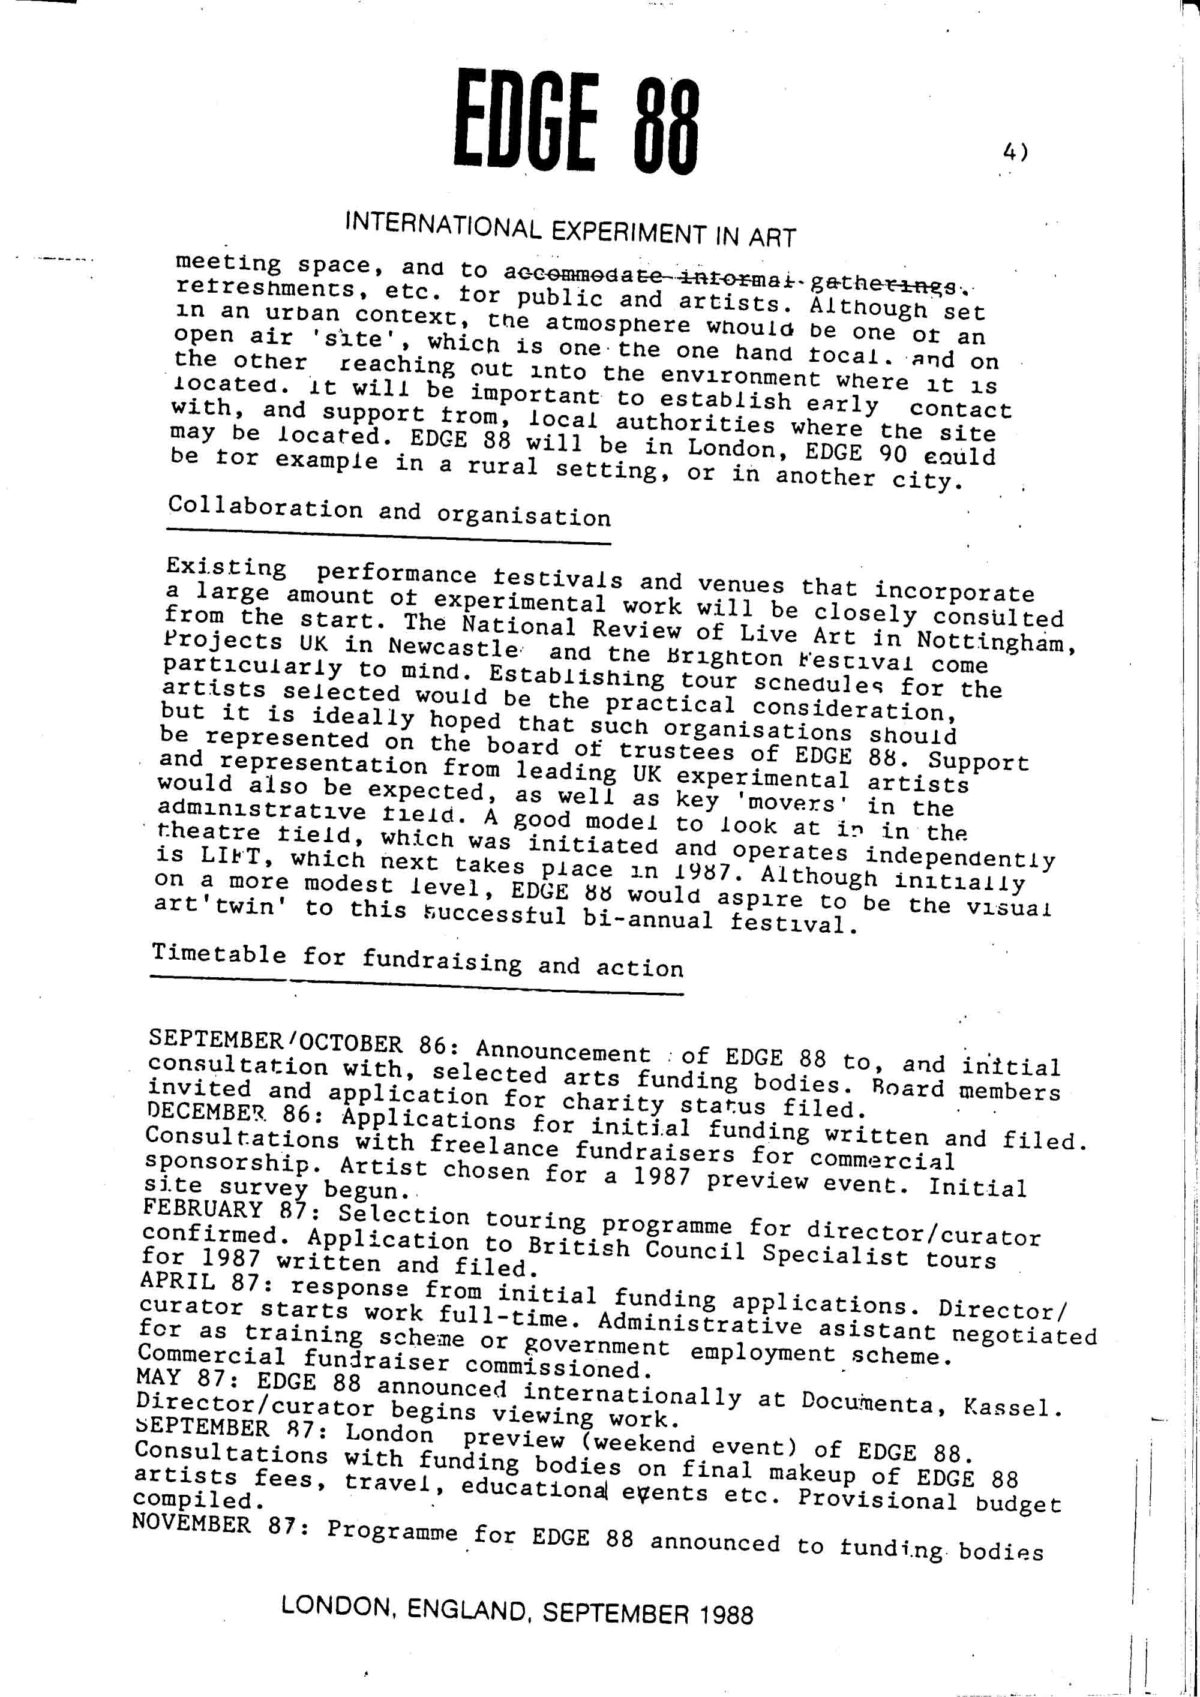 Rationale, 1988 (Page 4 of 5)